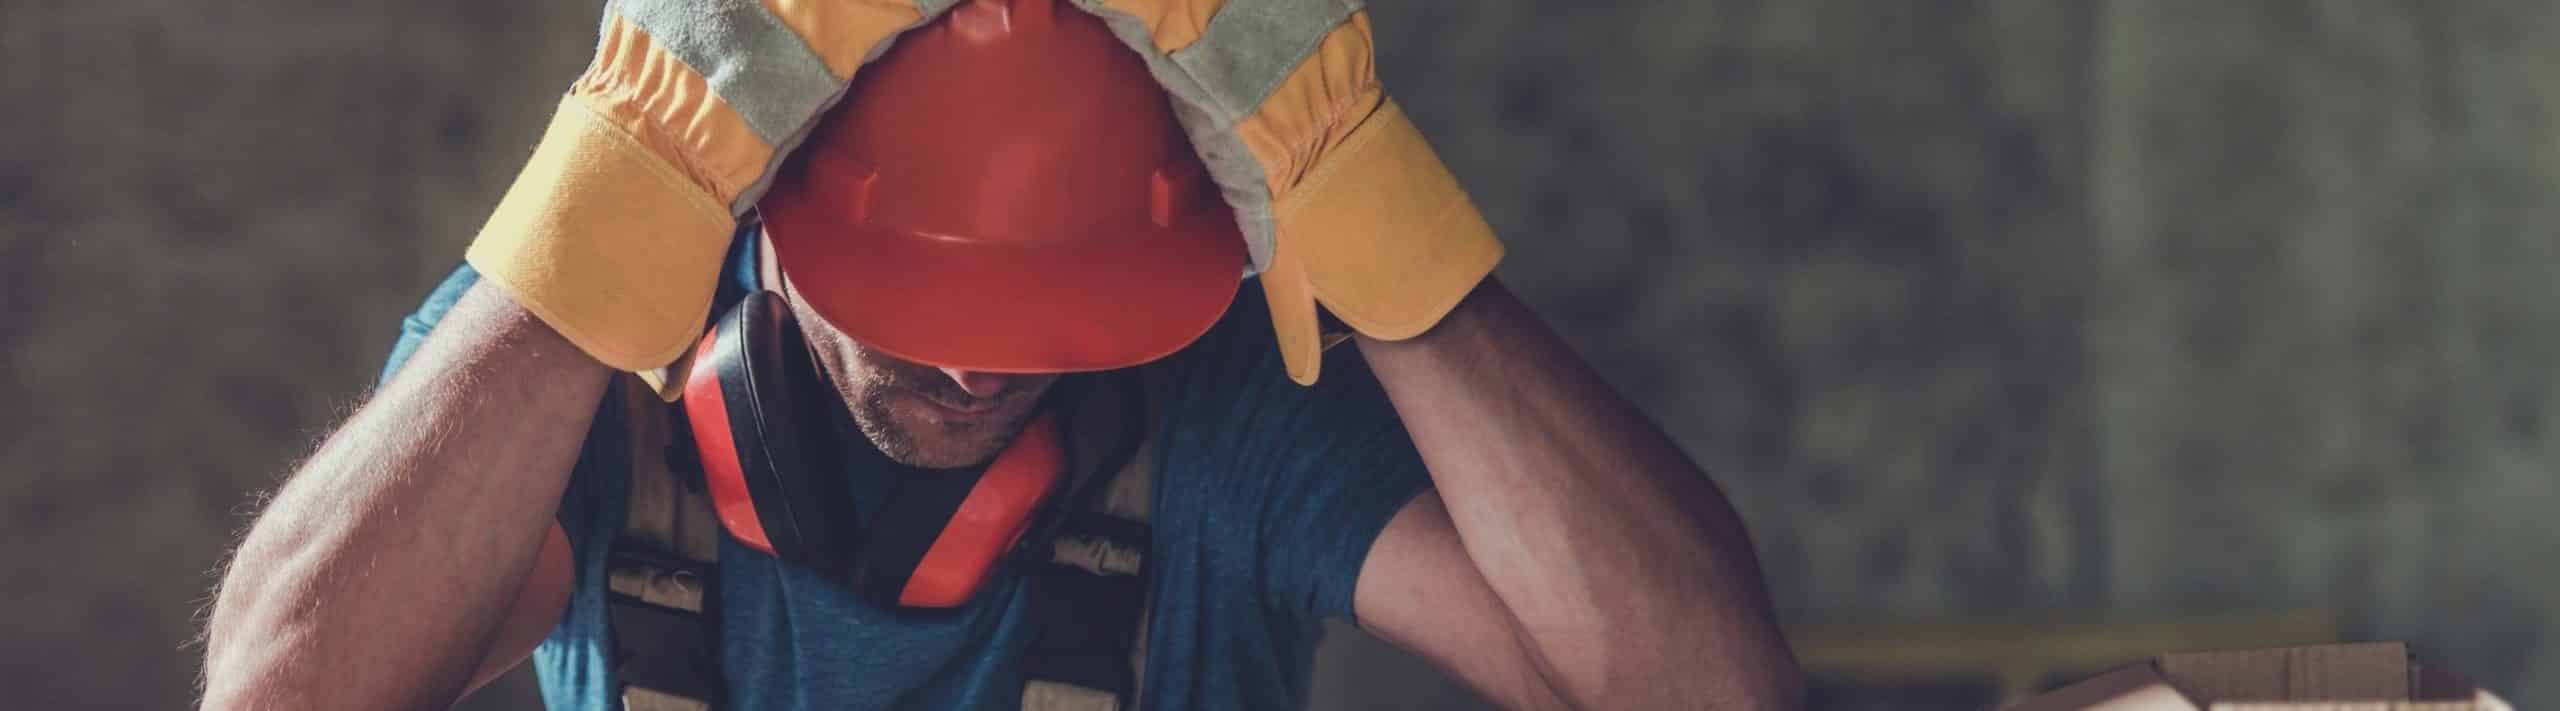 general contractor deals with difficulties as he holds his hard hat covered head in his hands